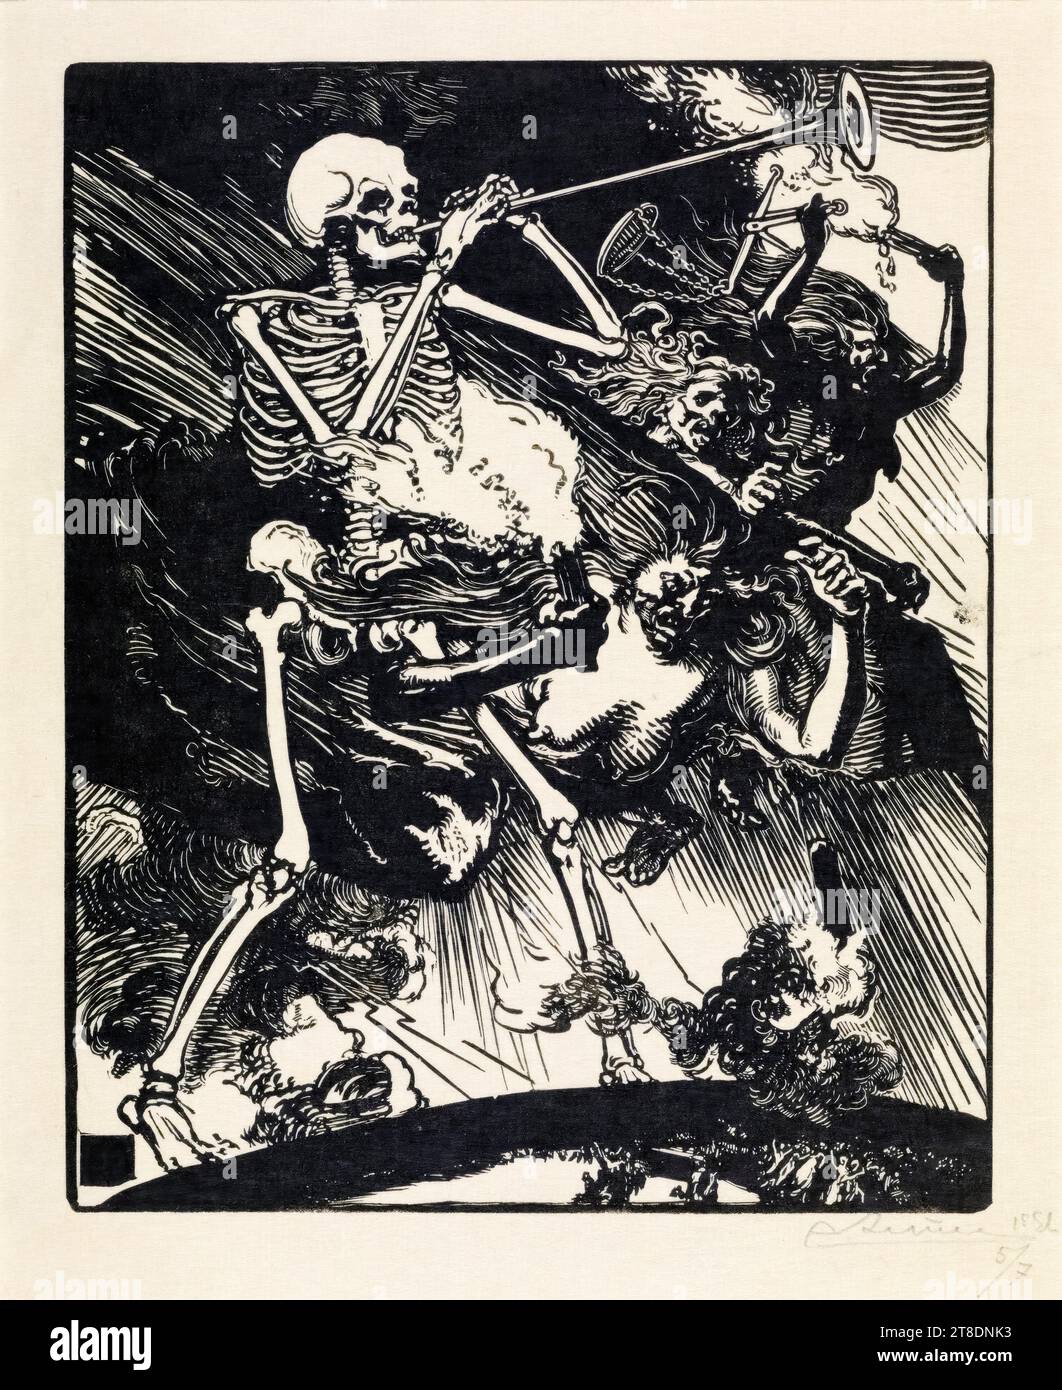 Auguste-Louis Lepère, Death and Passions Descend upon the World, woodcut print, 1914 Stock Photo